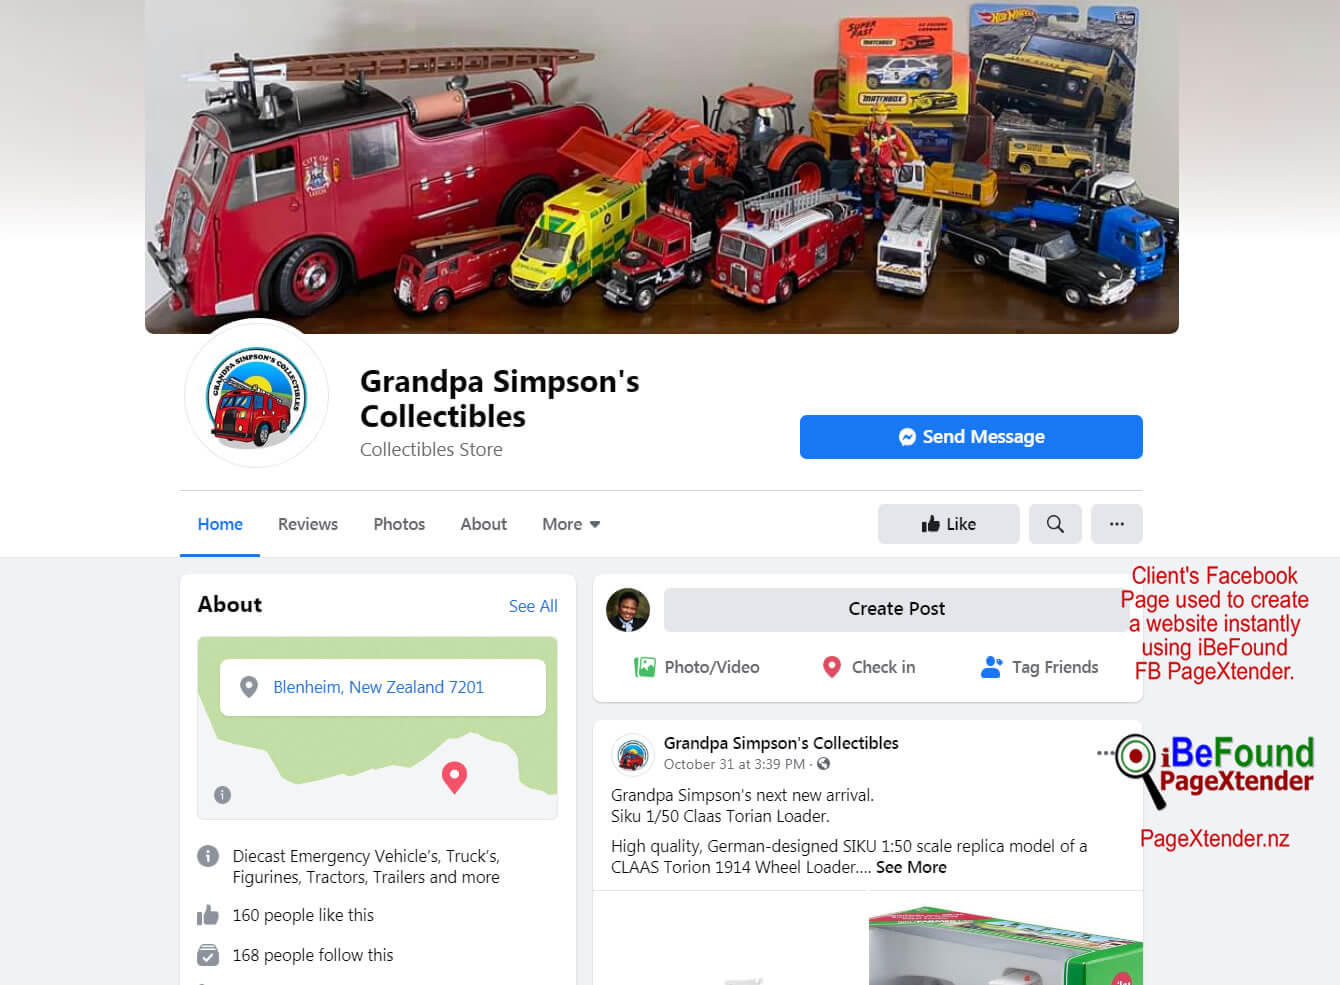 FB Page Of Grandpa Simpsons Collectibles Used For Instant Biz Site Creation With PageXtender By IBeFound NZ